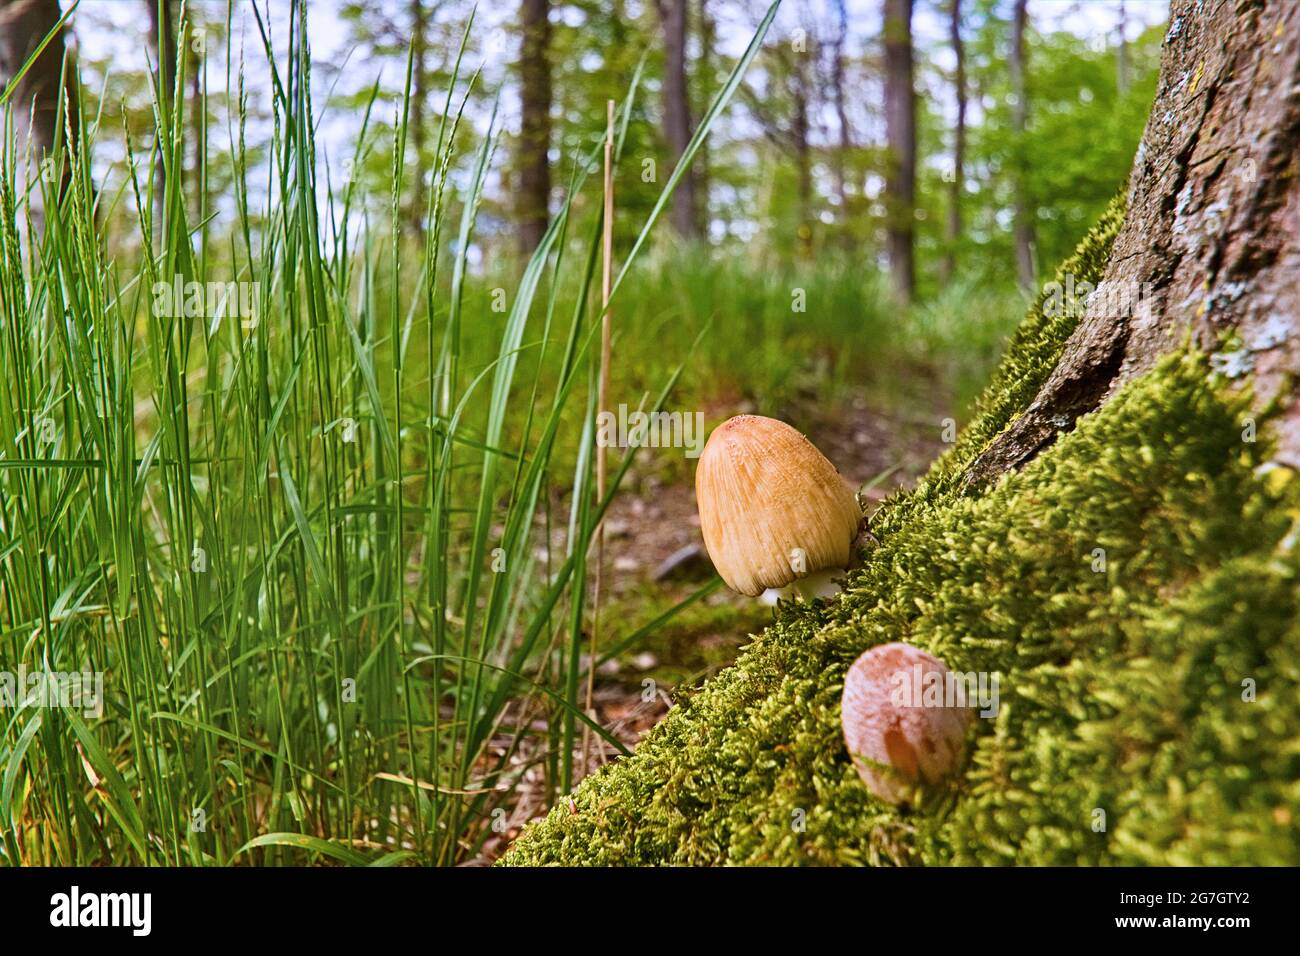 glistening inkcap (Coprinus micaceus), two fruiting bodies at the root of a tree, Germany, North Rhine-Westphalia Stock Photo